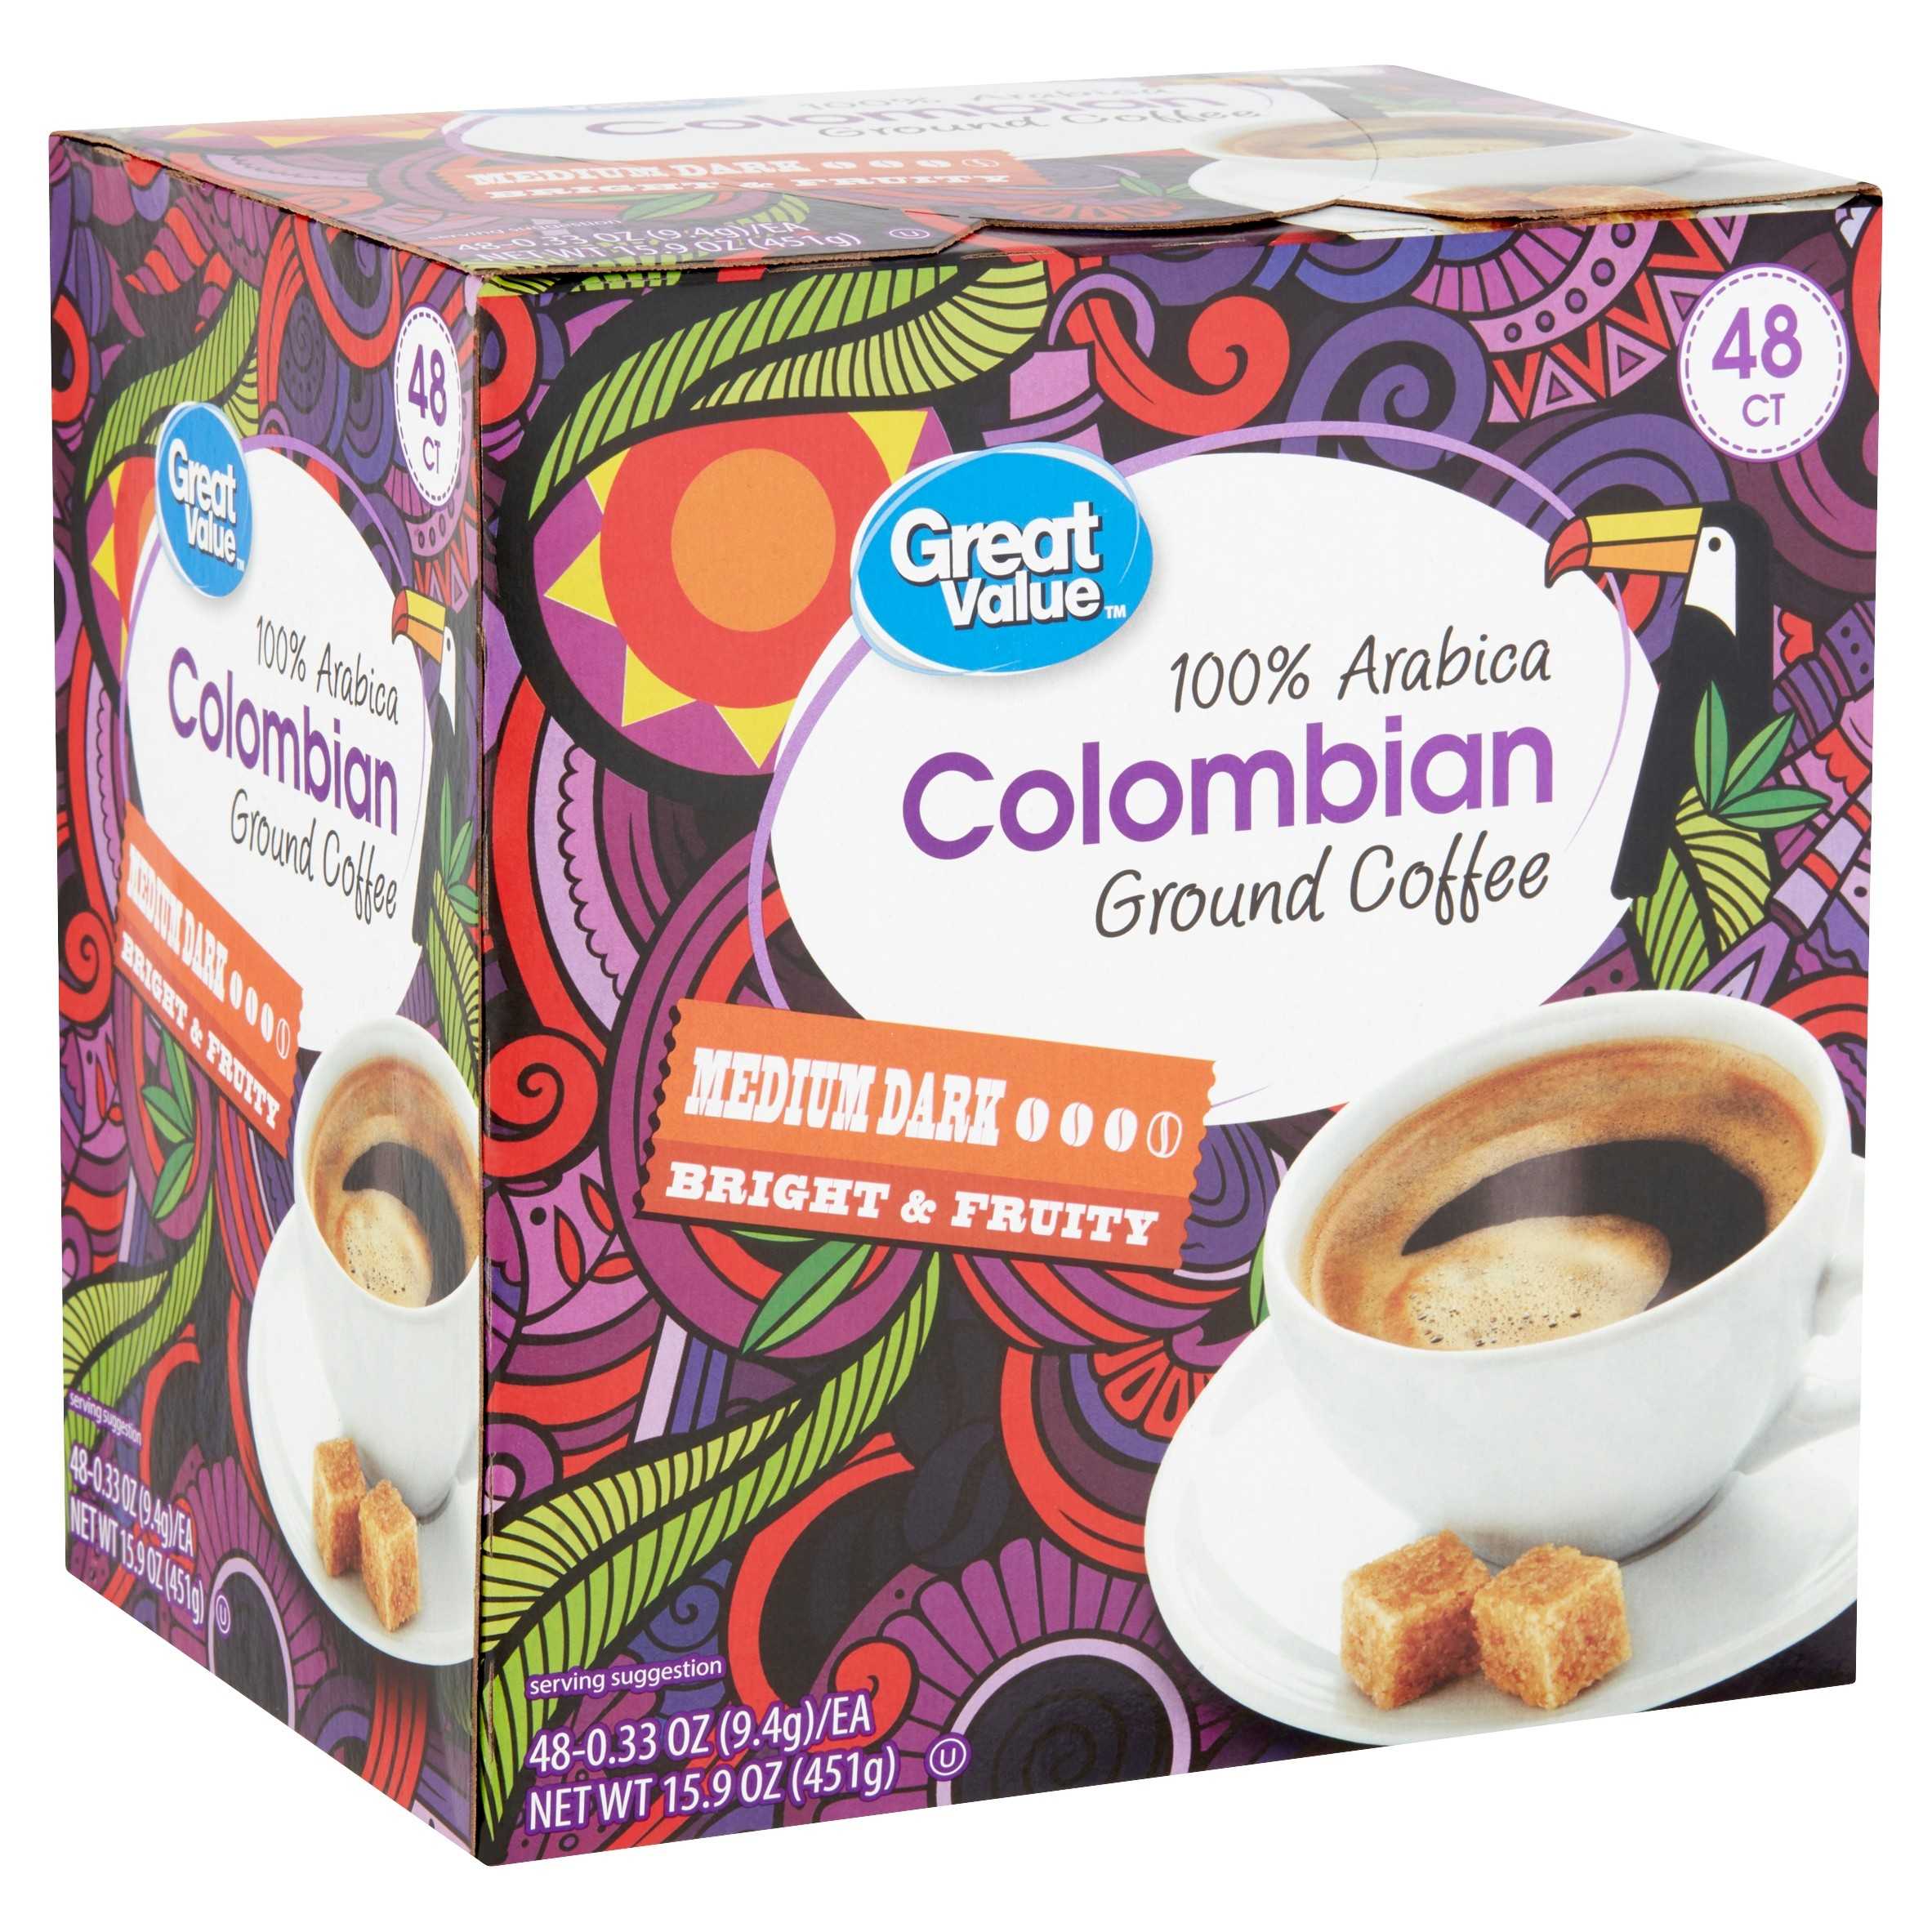 Great Value 100% Arabica Colombian Ground Coffee, 15.9 oz, 48 Count